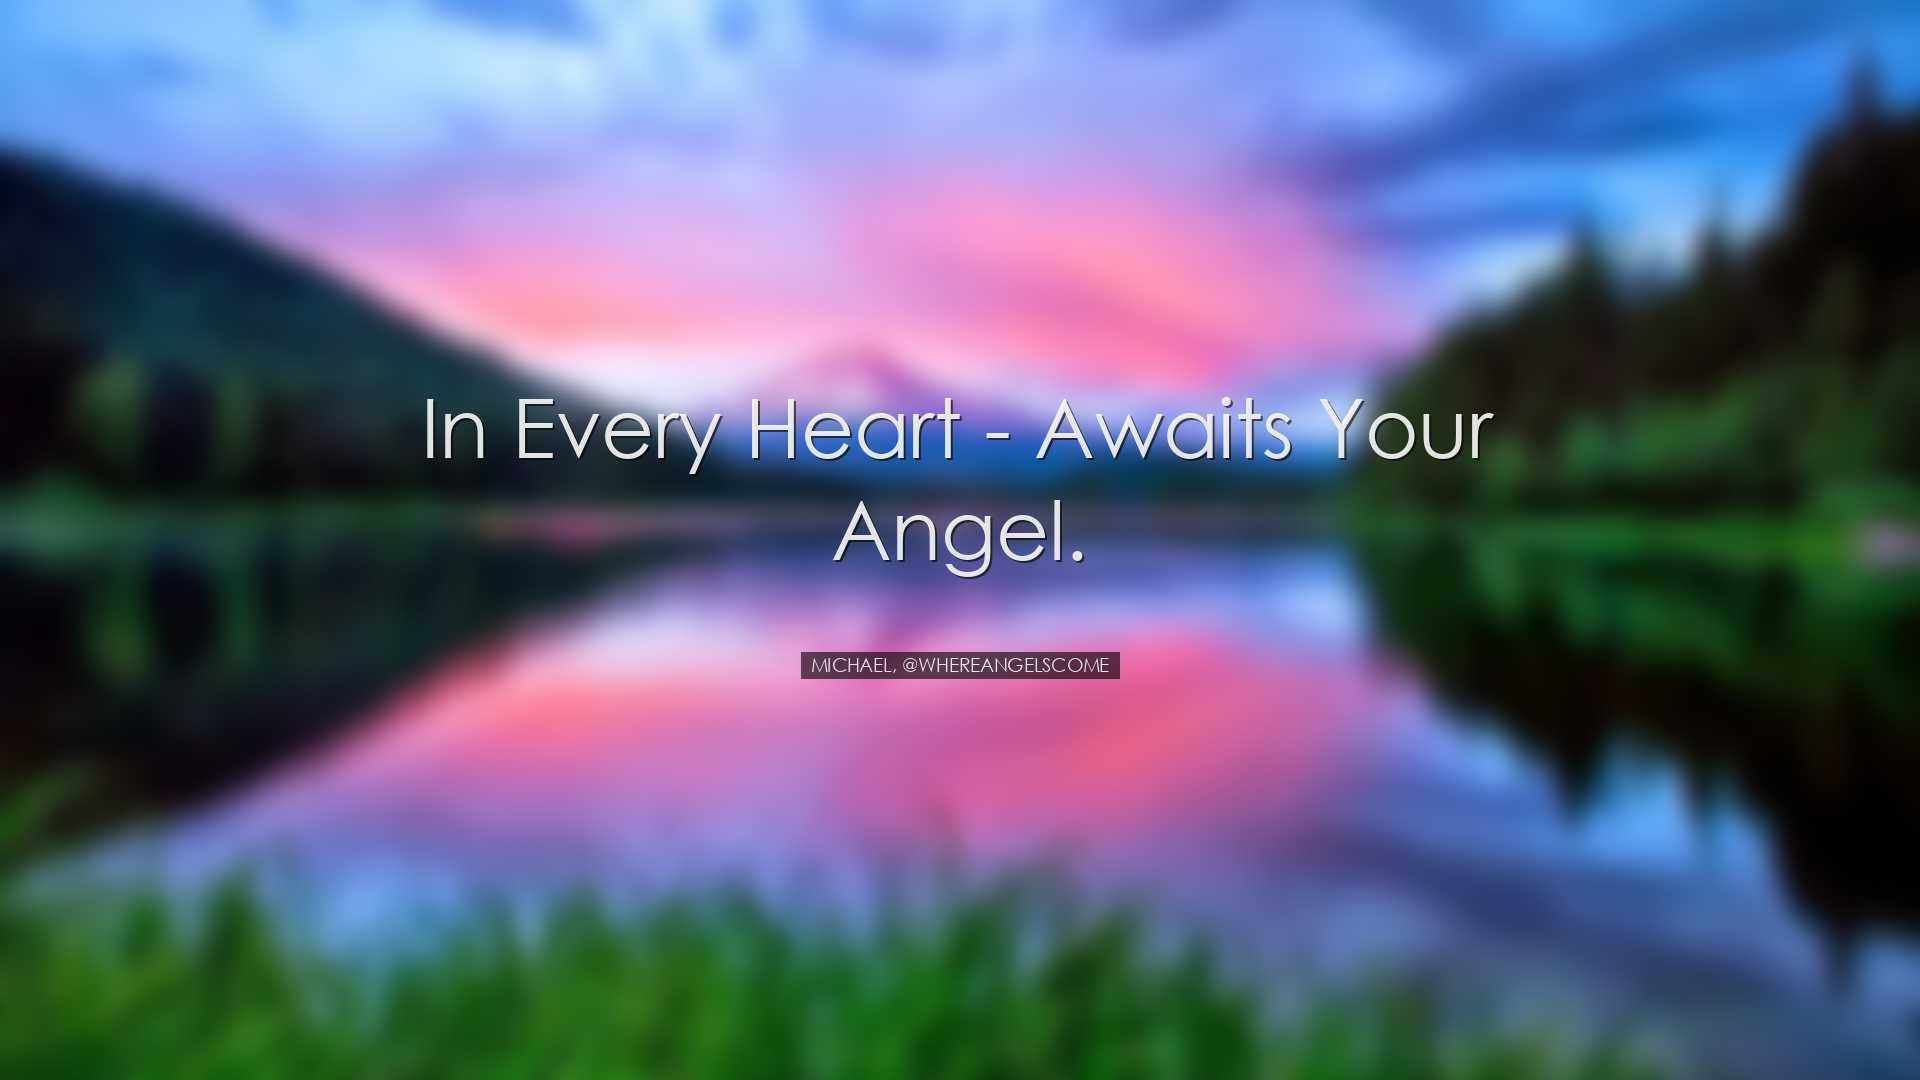 In every Heart - awaits Your Angel. - Michael, @WhereAngelsCome